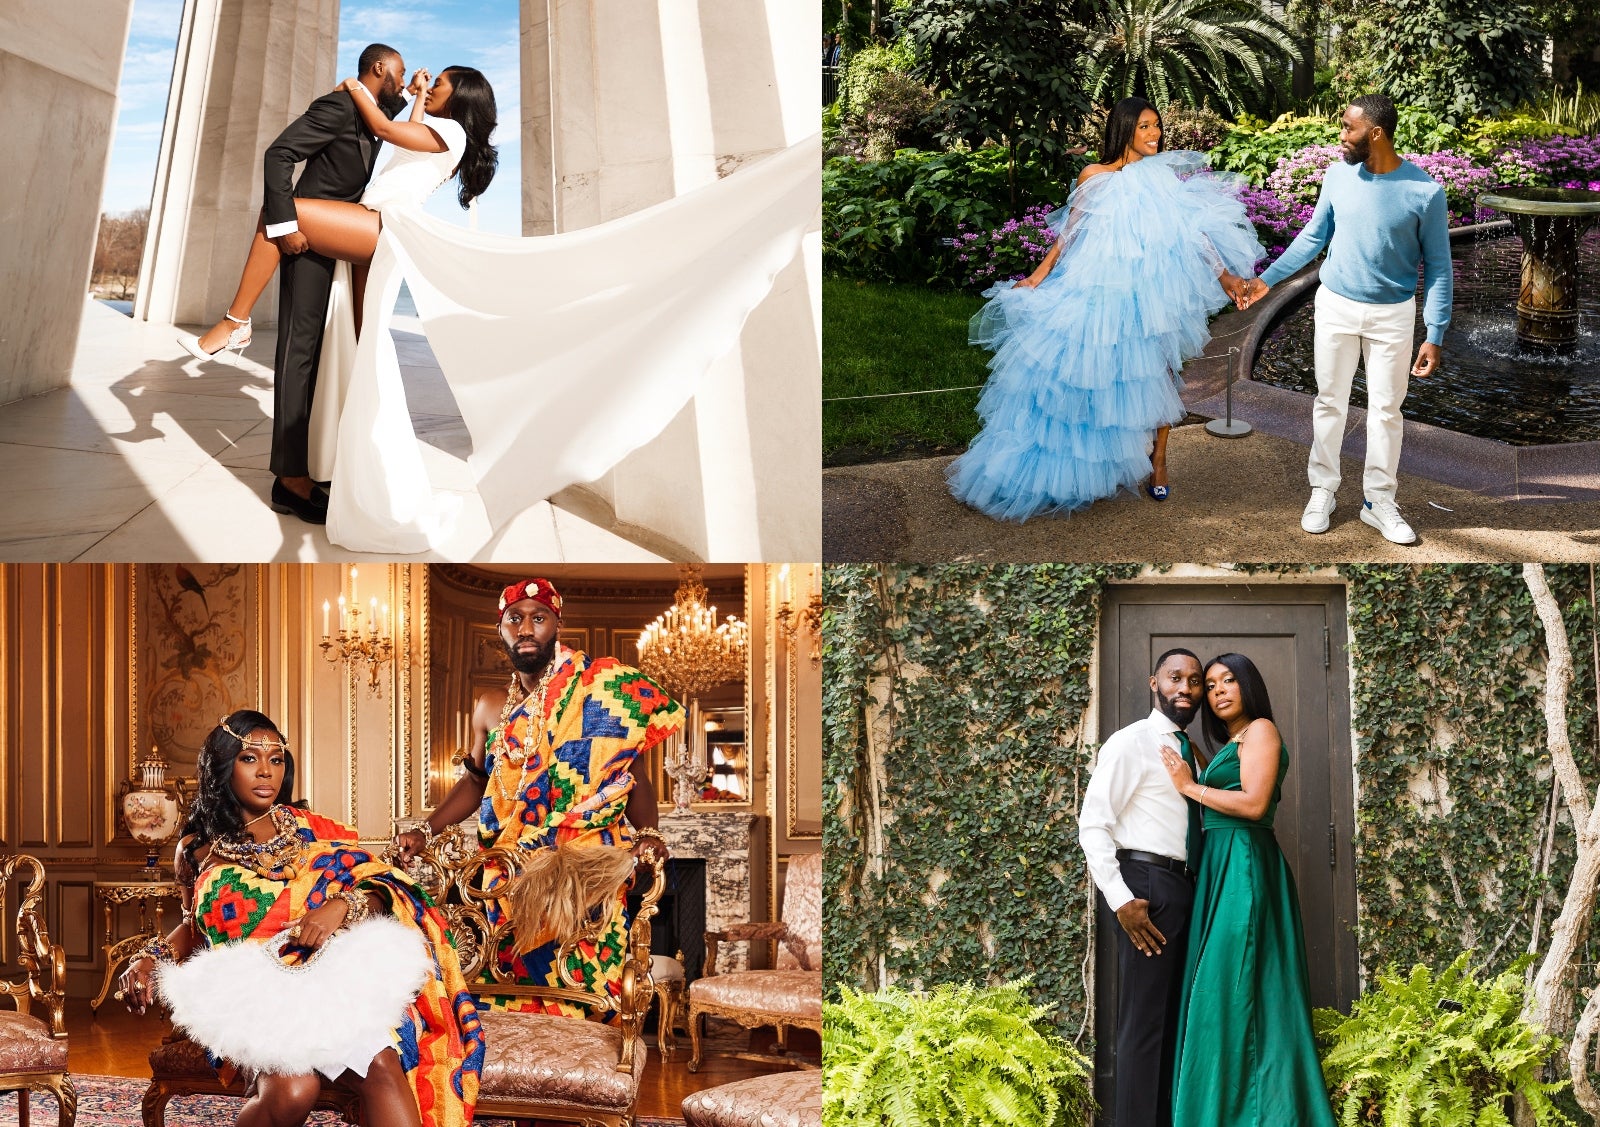 Old, New, Borrowed, Blue: This Couple’s Epic Engagement Shoot Included Four Fabulous Outfit Changes